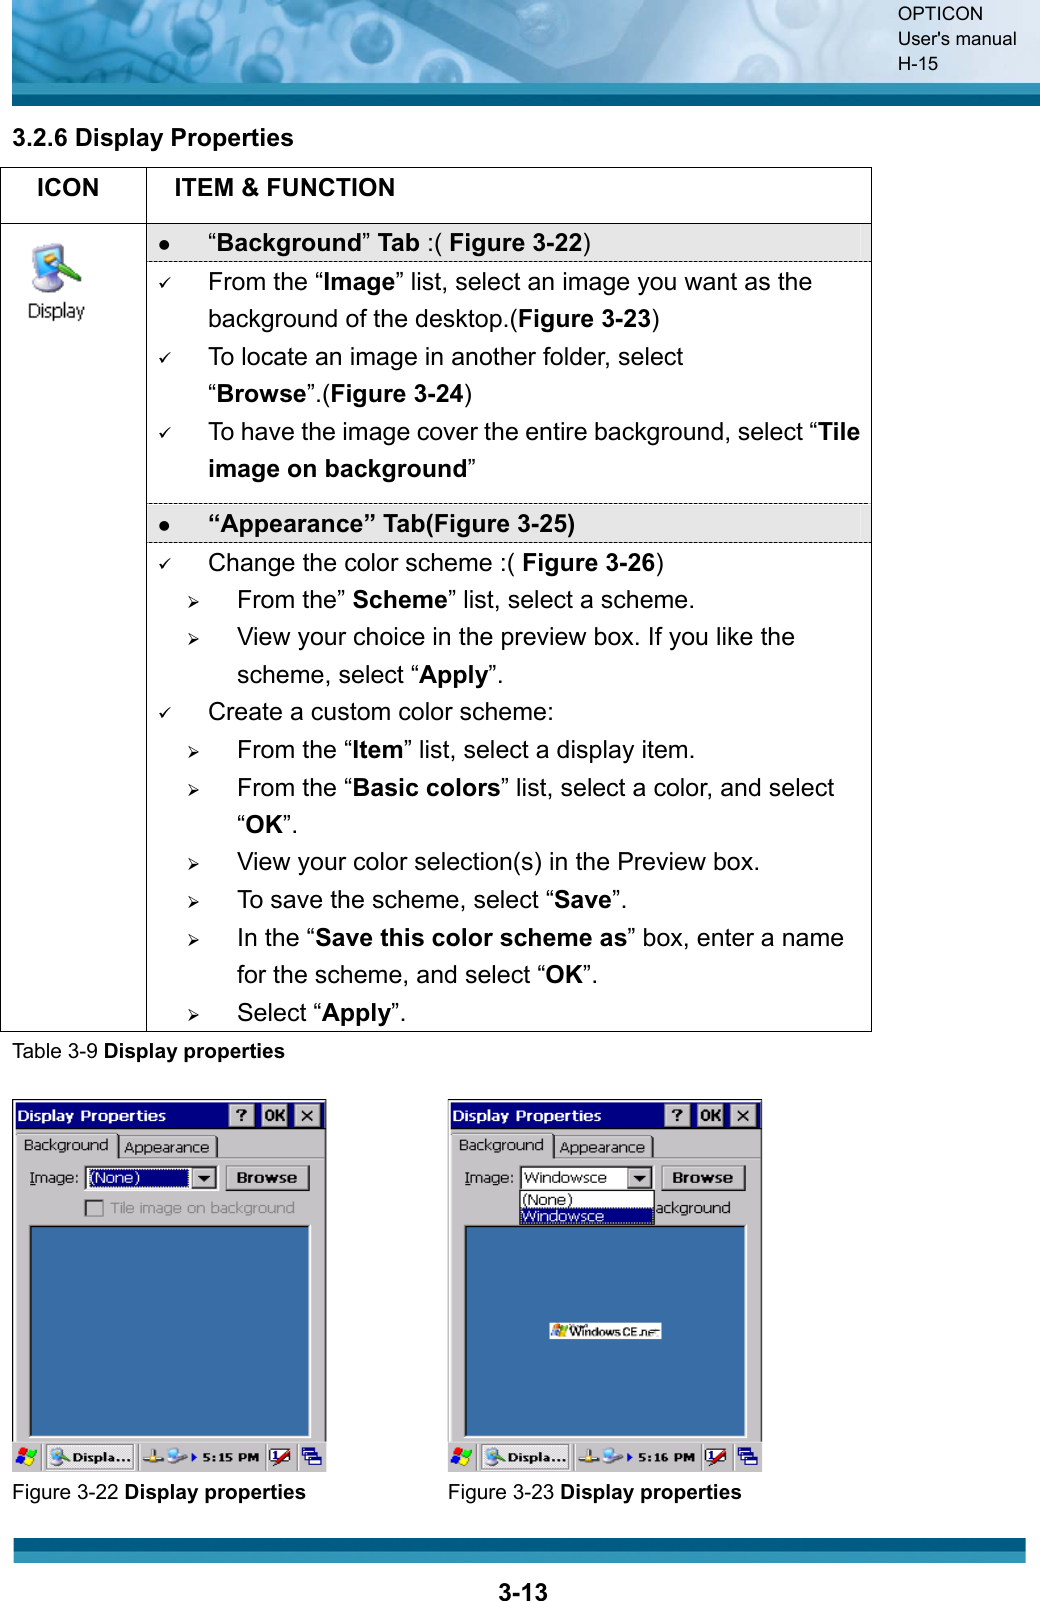 OPTICON User&apos;s manual H-153-133.2.6 Display Properties ICON ITEM &amp; FUNCTION z“Background”Tab :( Figure 3-22)9From the “Image” list, select an image you want as the background of the desktop.(Figure 3-23)9To locate an image in another folder, select “Browse”.(Figure 3-24)9To have the image cover the entire background, select “Tile image on background”z“Appearance” Tab(Figure 3-25)9Change the color scheme :( Figure 3-26)¾From the” Scheme” list, select a scheme.¾View your choice in the preview box. If you like the scheme, select “Apply”.9Create a custom color scheme:¾From the “Item” list, select a display item.¾From the “Basic colors” list, select a color, and select “OK”.¾View your color selection(s) in the Preview box.¾To save the scheme, select “Save”.¾In the “Save this color scheme as” box, enter a name for the scheme, and select “OK”.¾Select “Apply”.Table 3-9 Display propertiesFigure 3-22 Display properties Figure 3-23 Display properties